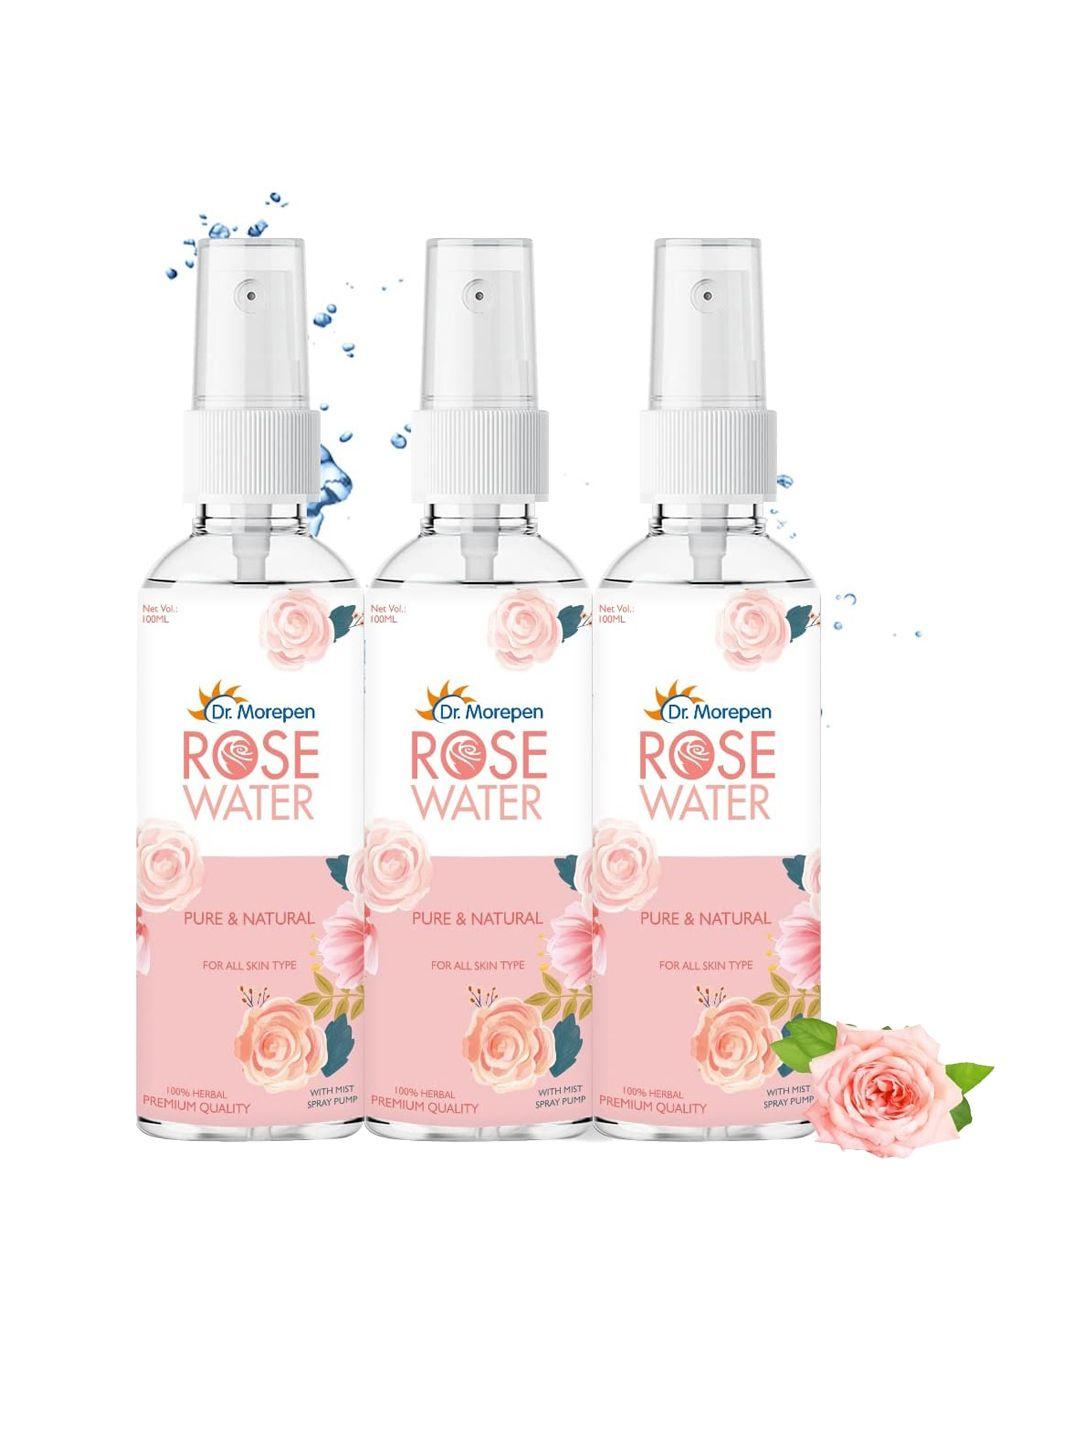 dr. morepen set of 3 pure & natural rose water face toner for all skin types - 100 ml each